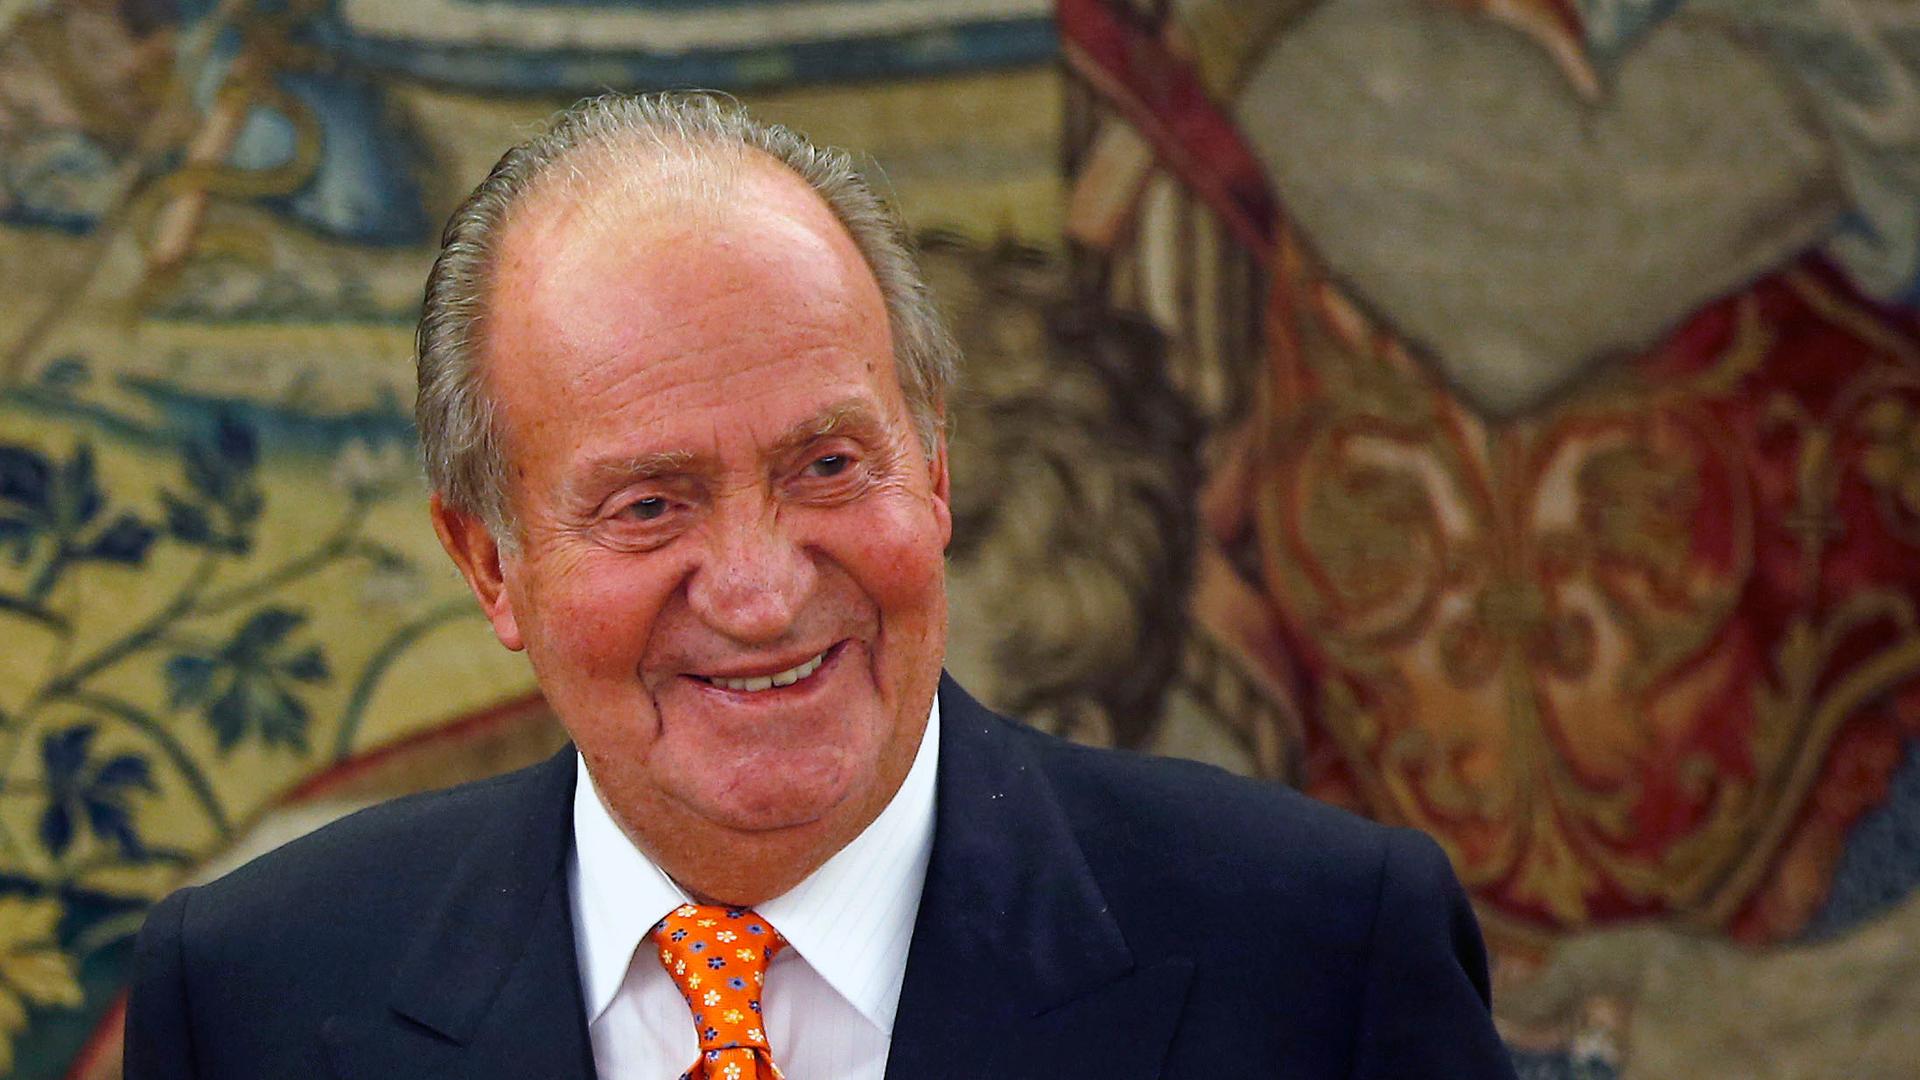 Spain's King Juan Carlos smiles in one of his latest audiences at the Zarzuela Palace outside Madrid, May 27, 2014. Spain's Prime Minister Mariano Rajoy said on June 2, 2014 that King Juan Carlos will abdicate and Prince Felipe will take over the throne. 